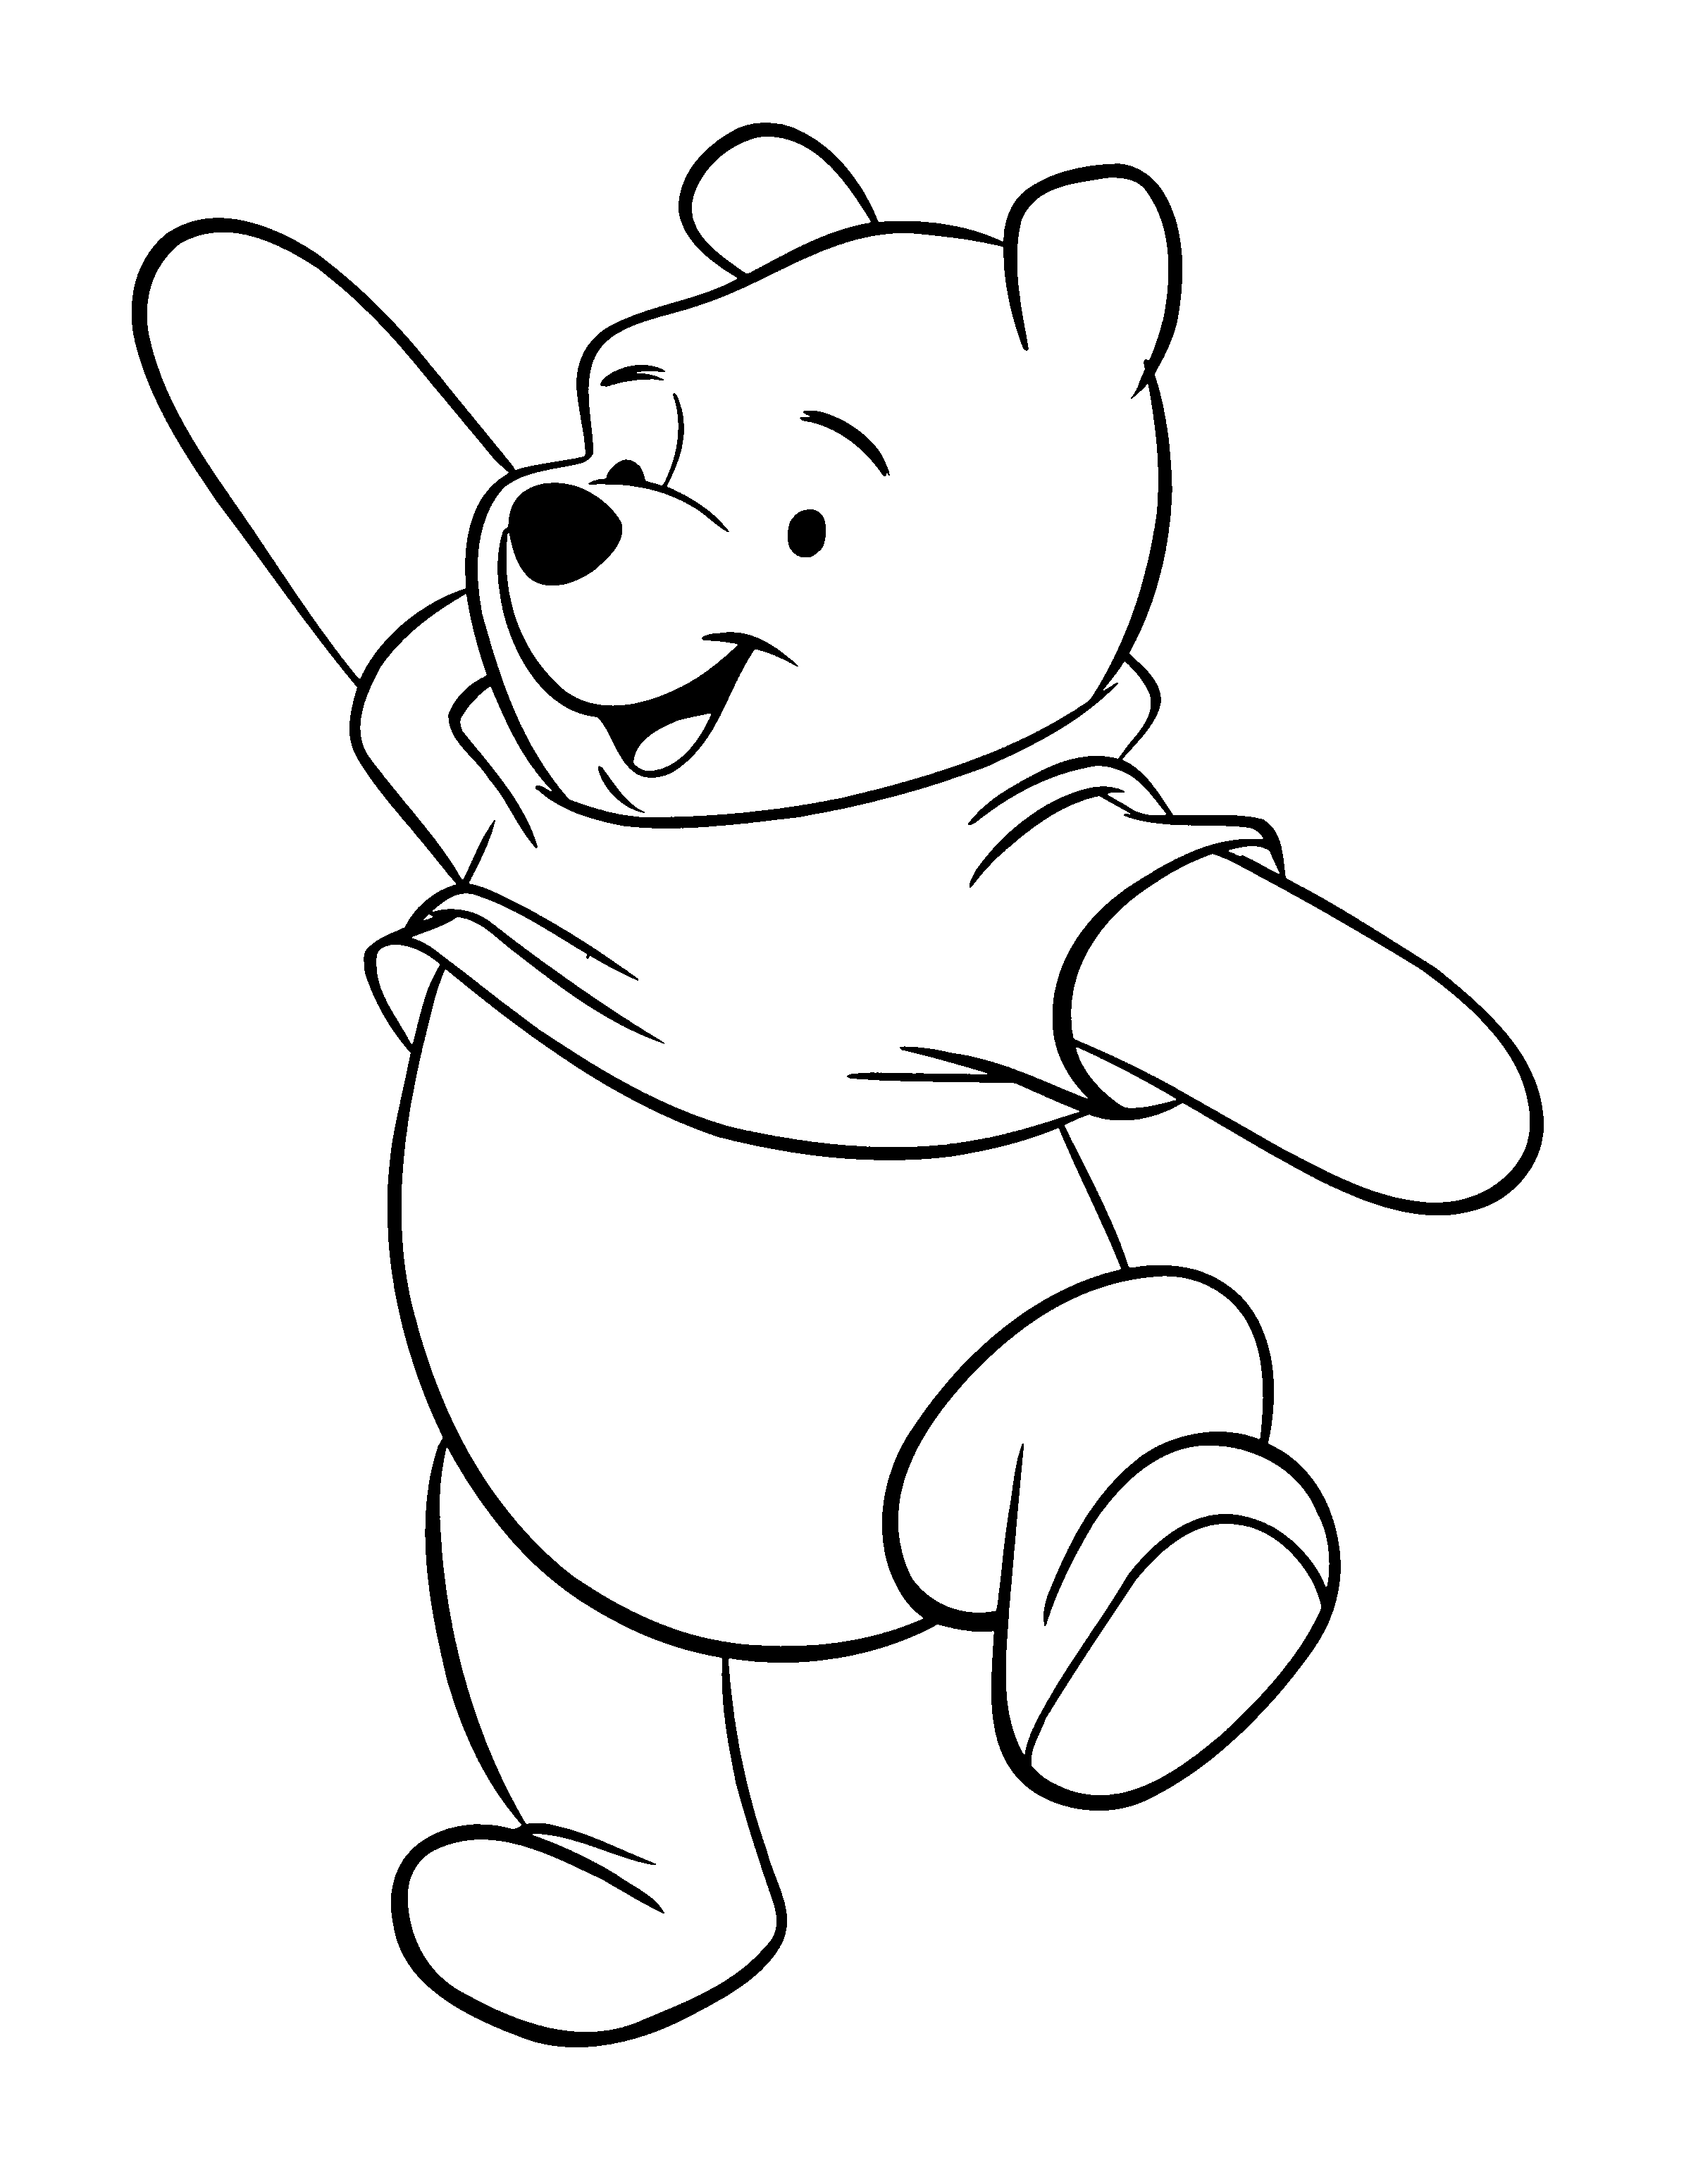 Happy Winnie The Pooh Coloring Pages Winnie The Pooh Drawing Winnie The Pooh Pictures